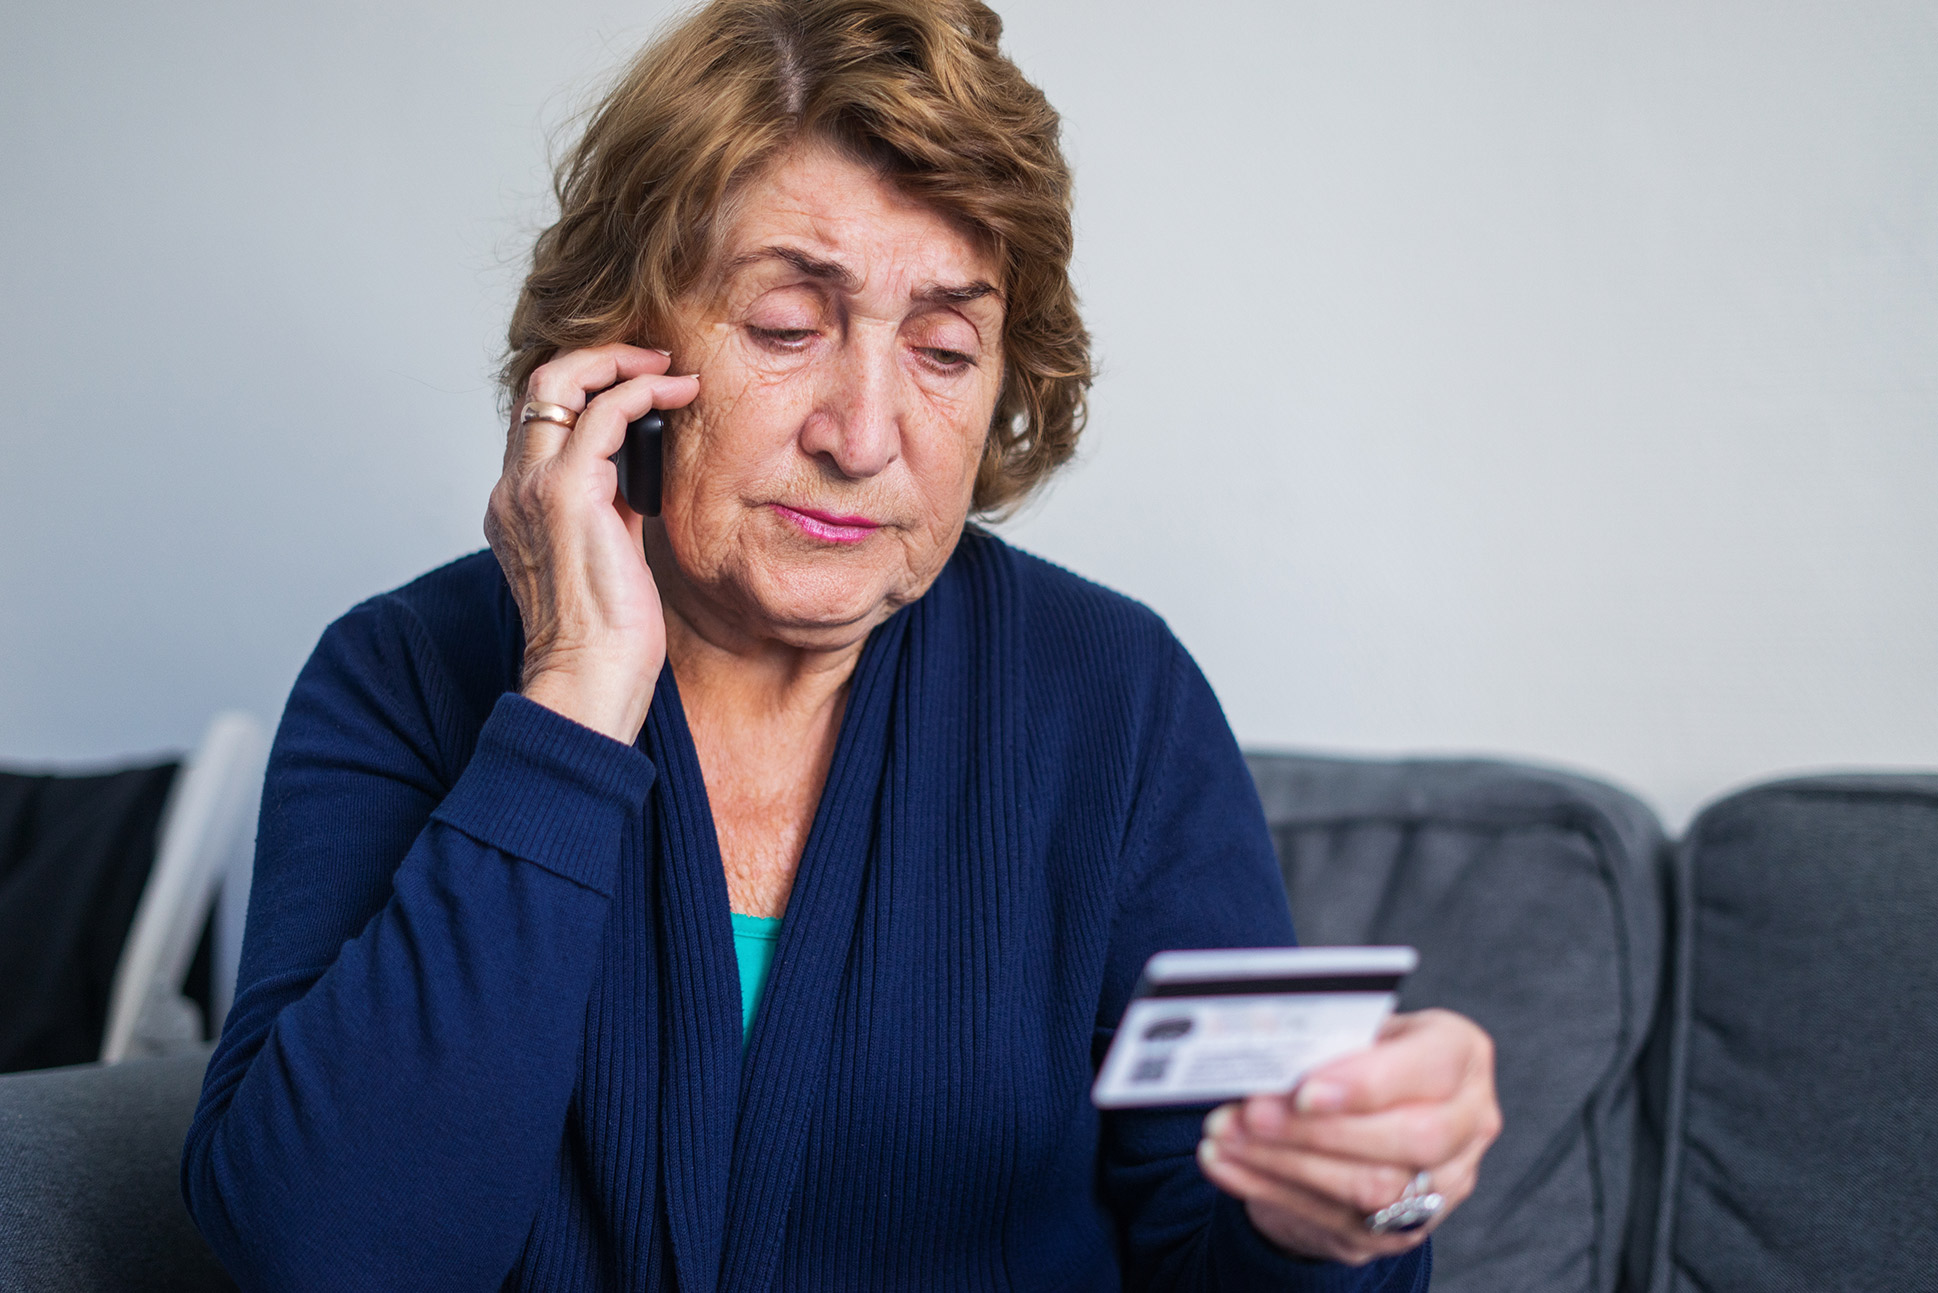 Are People at High Risk for Dementia More Vulnerable to Scams?